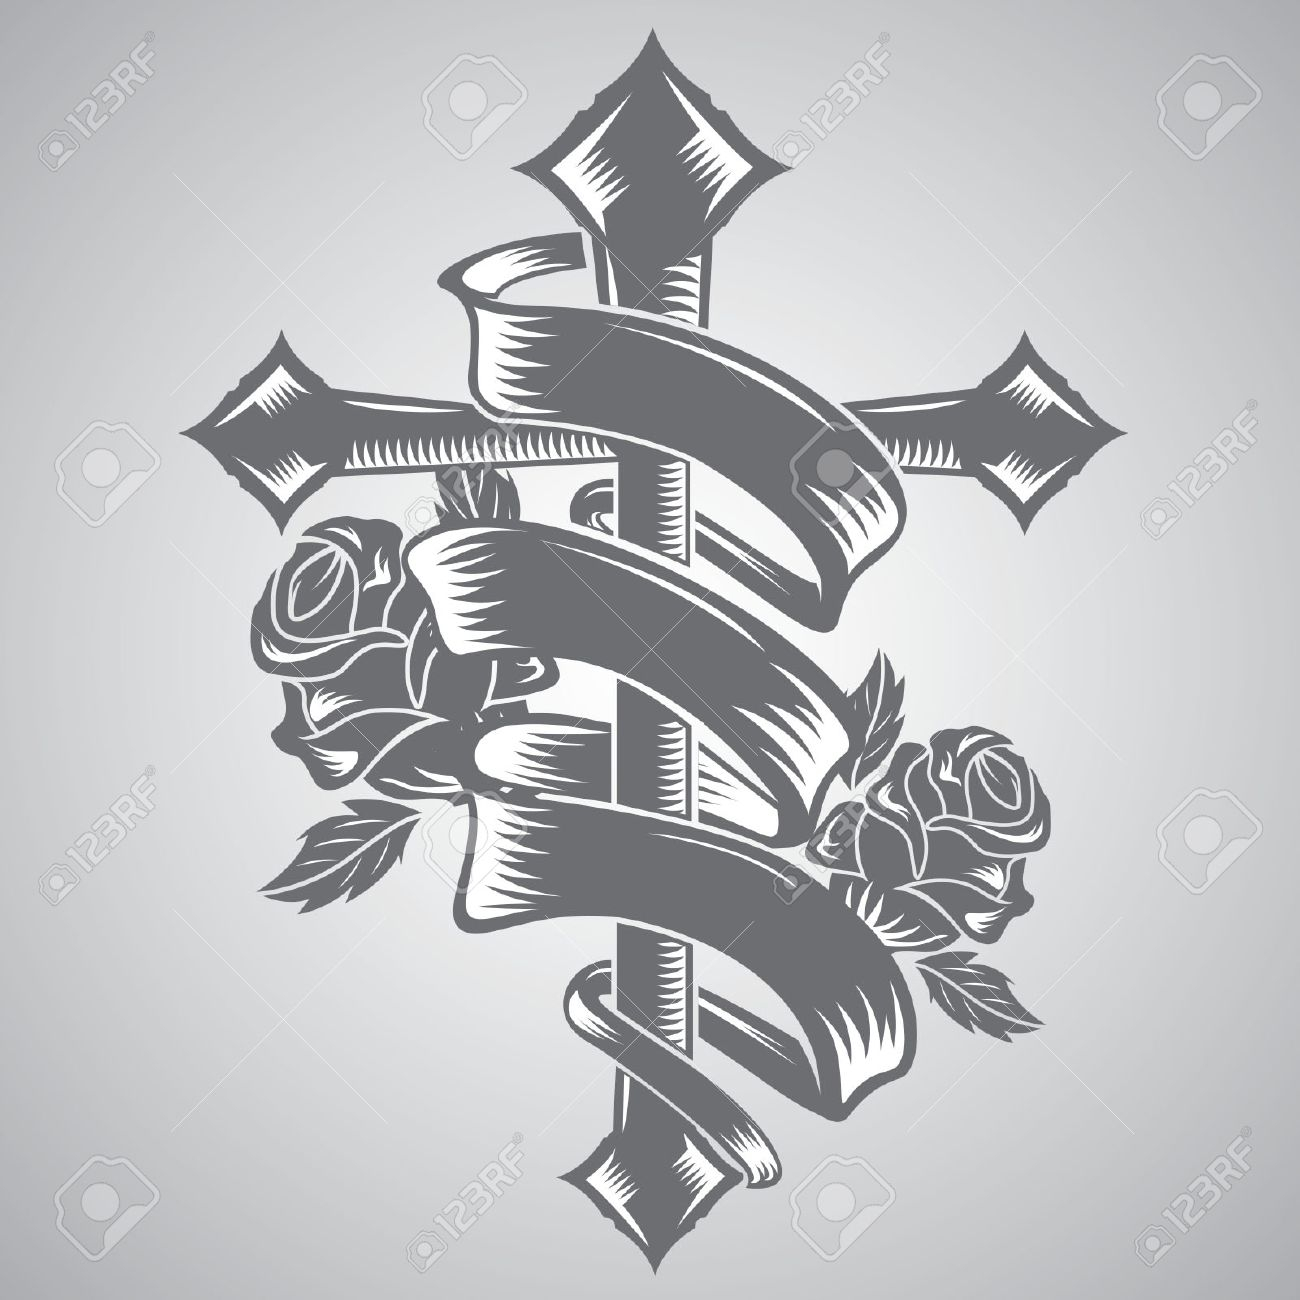 Cross With Ribbon Tattoo Vector intended for sizing 1300 X 1300